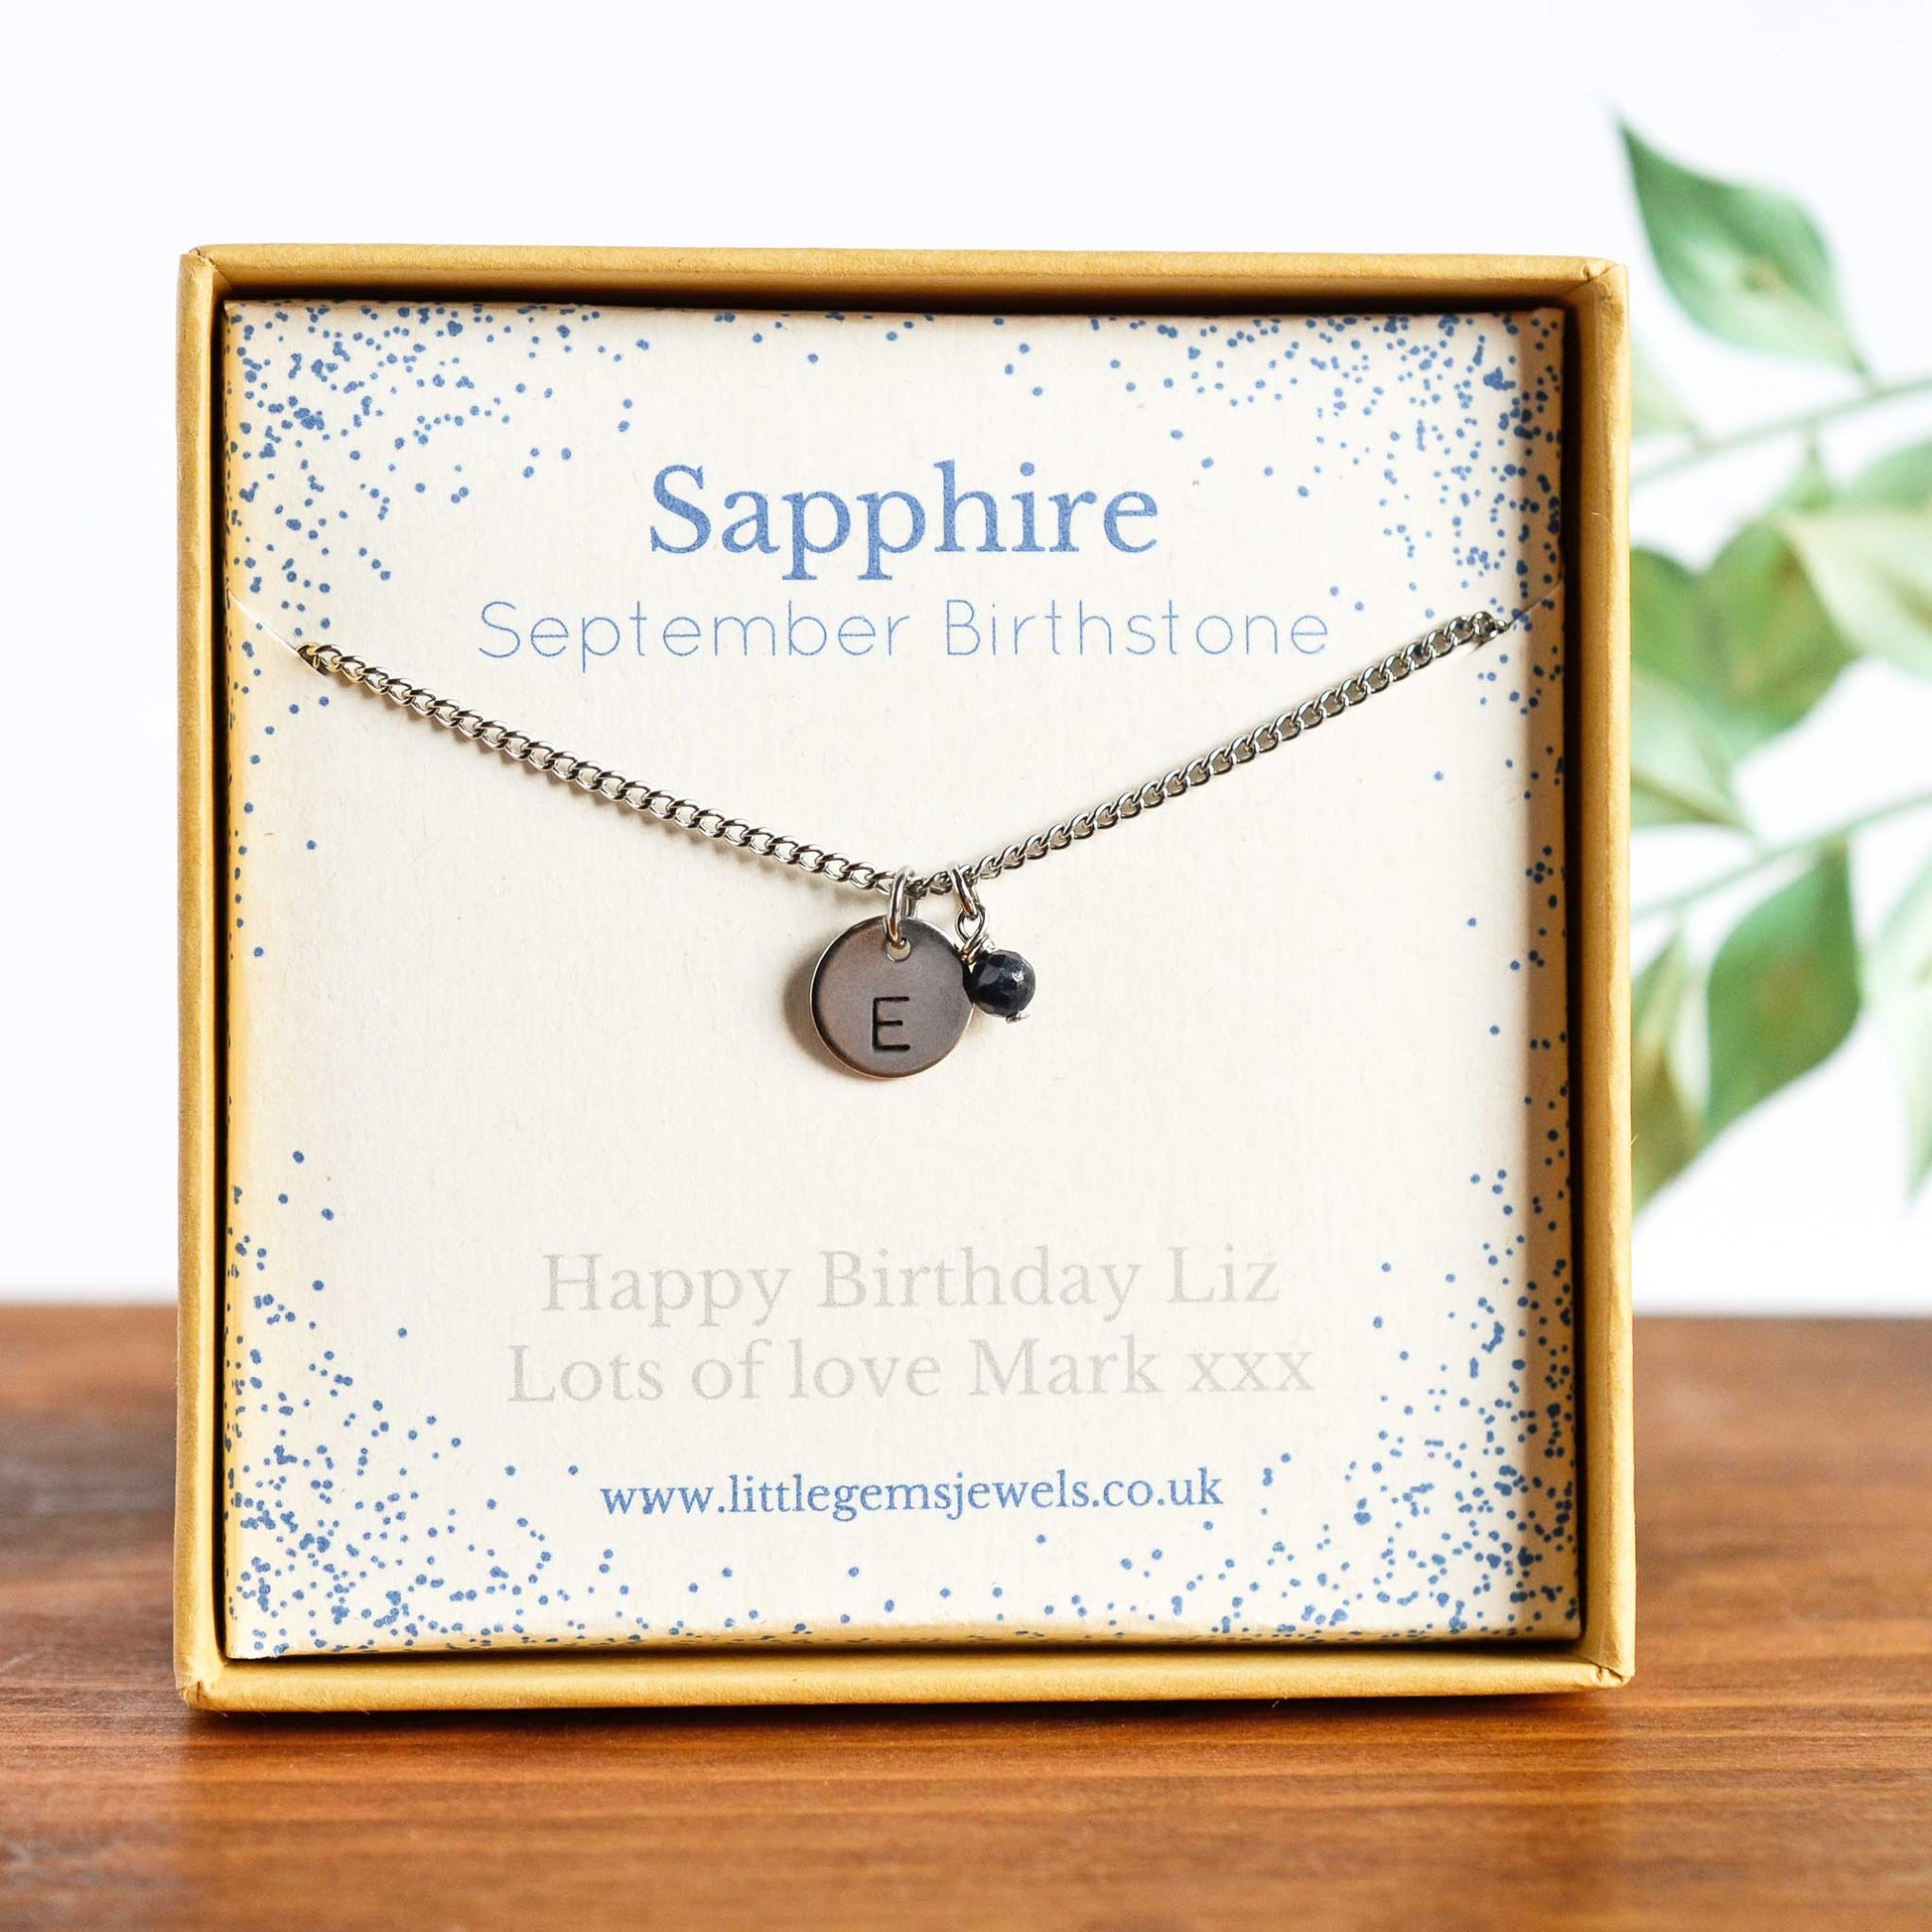 September Birthstone necklace with initial charm & personalised gift message in eco gift box